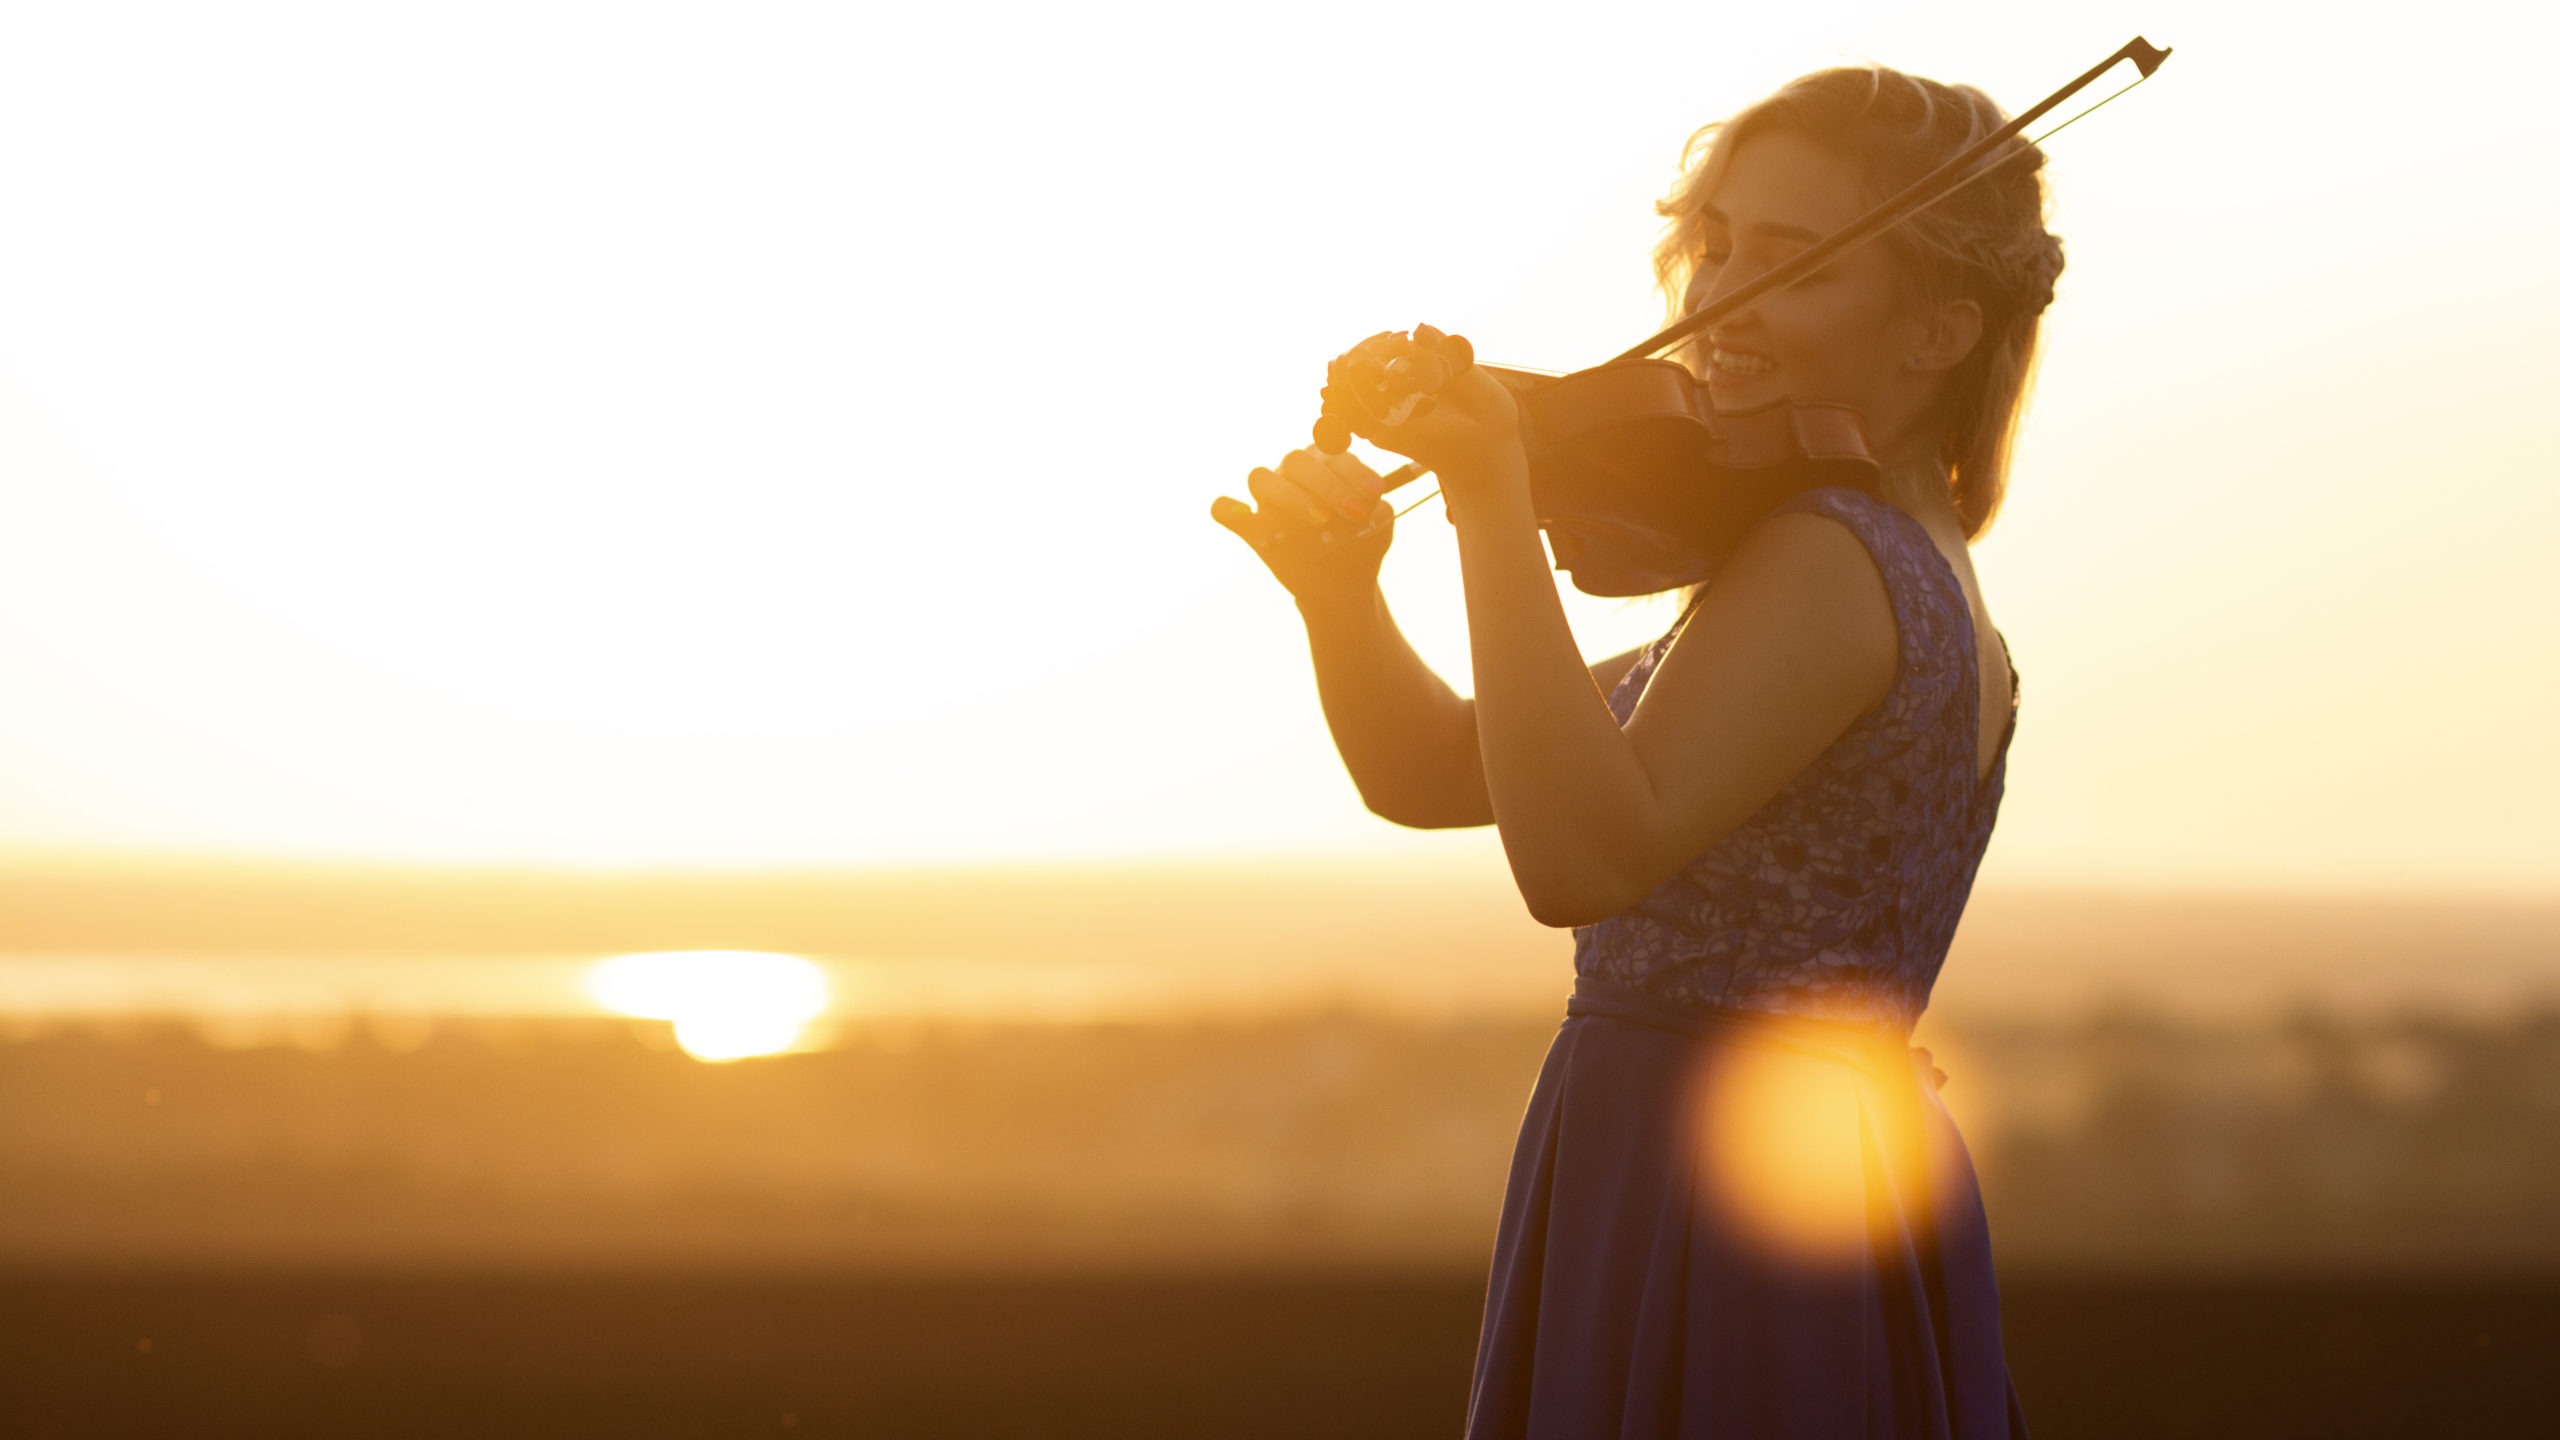 silhouette of a female figure playing the violin at sunset